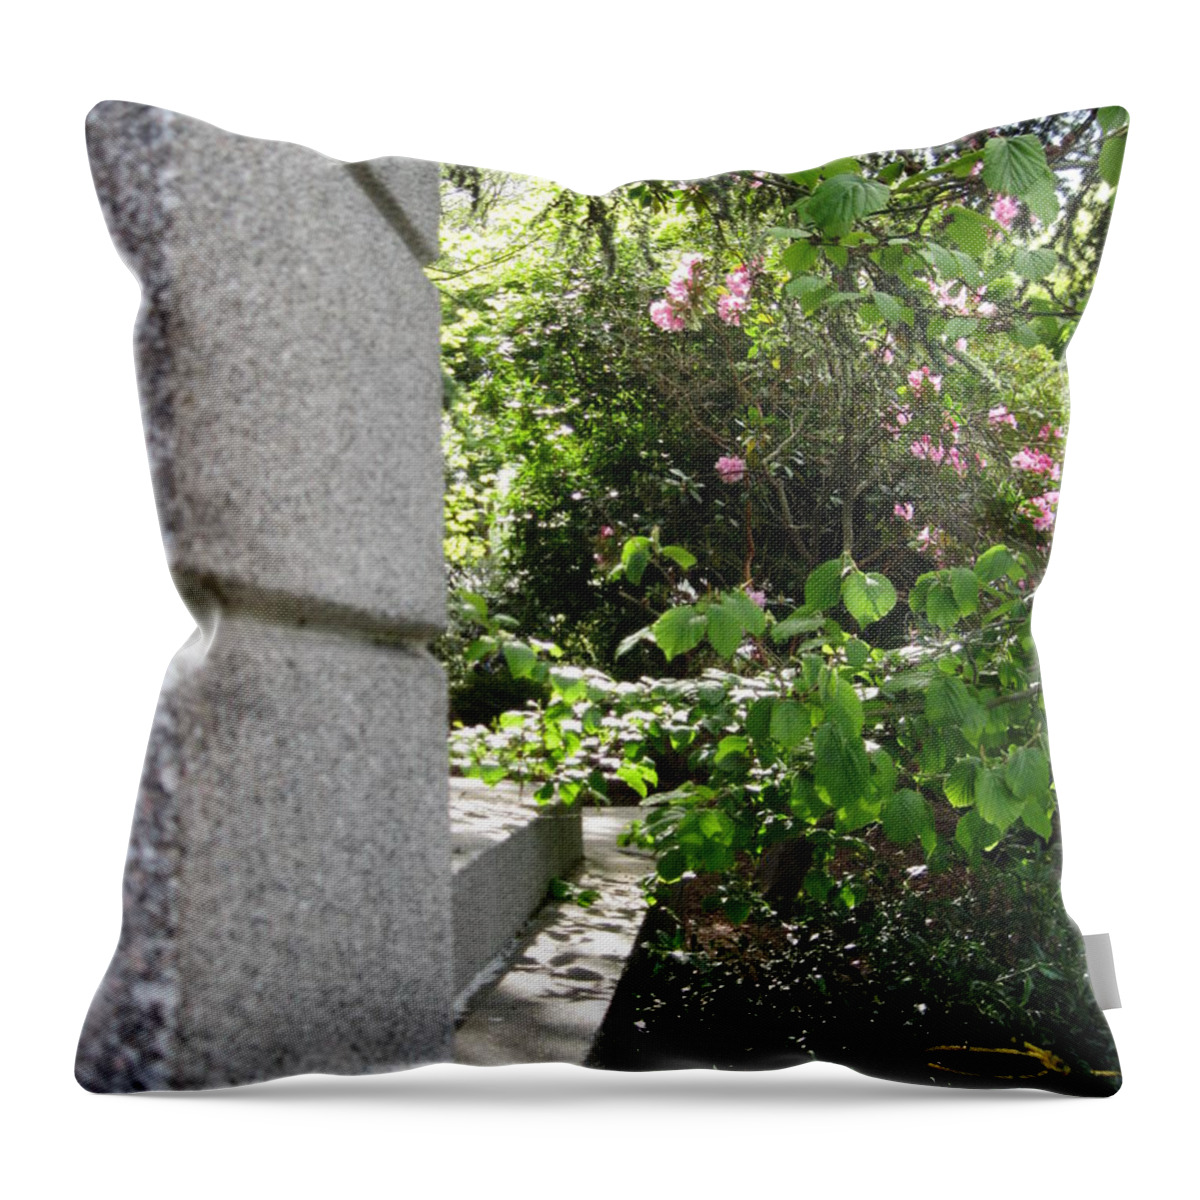 Seattle Throw Pillow featuring the photograph Corner Garden by David Trotter